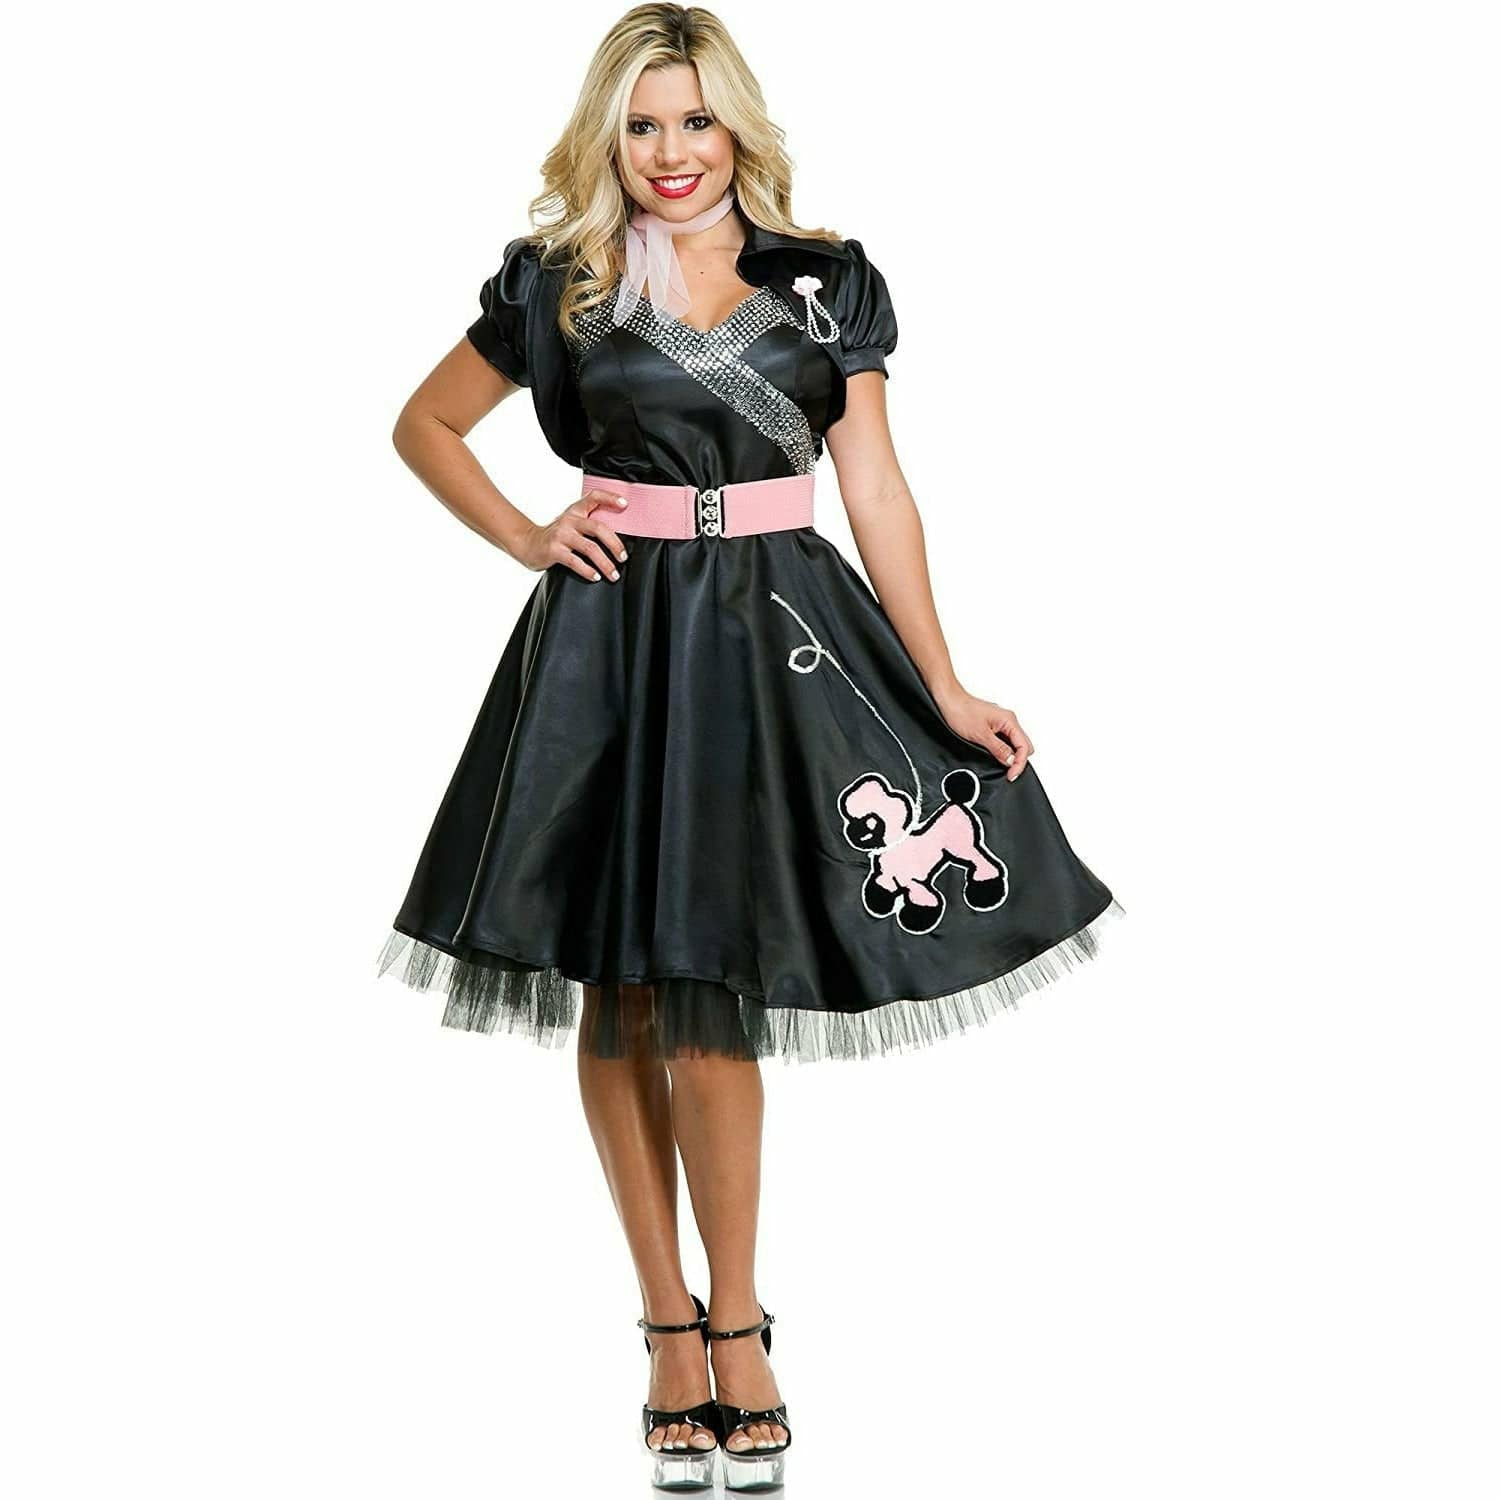 Ultimate Party Super Stores COSTUMES Womens Satin Poodle Dress Adult Costume